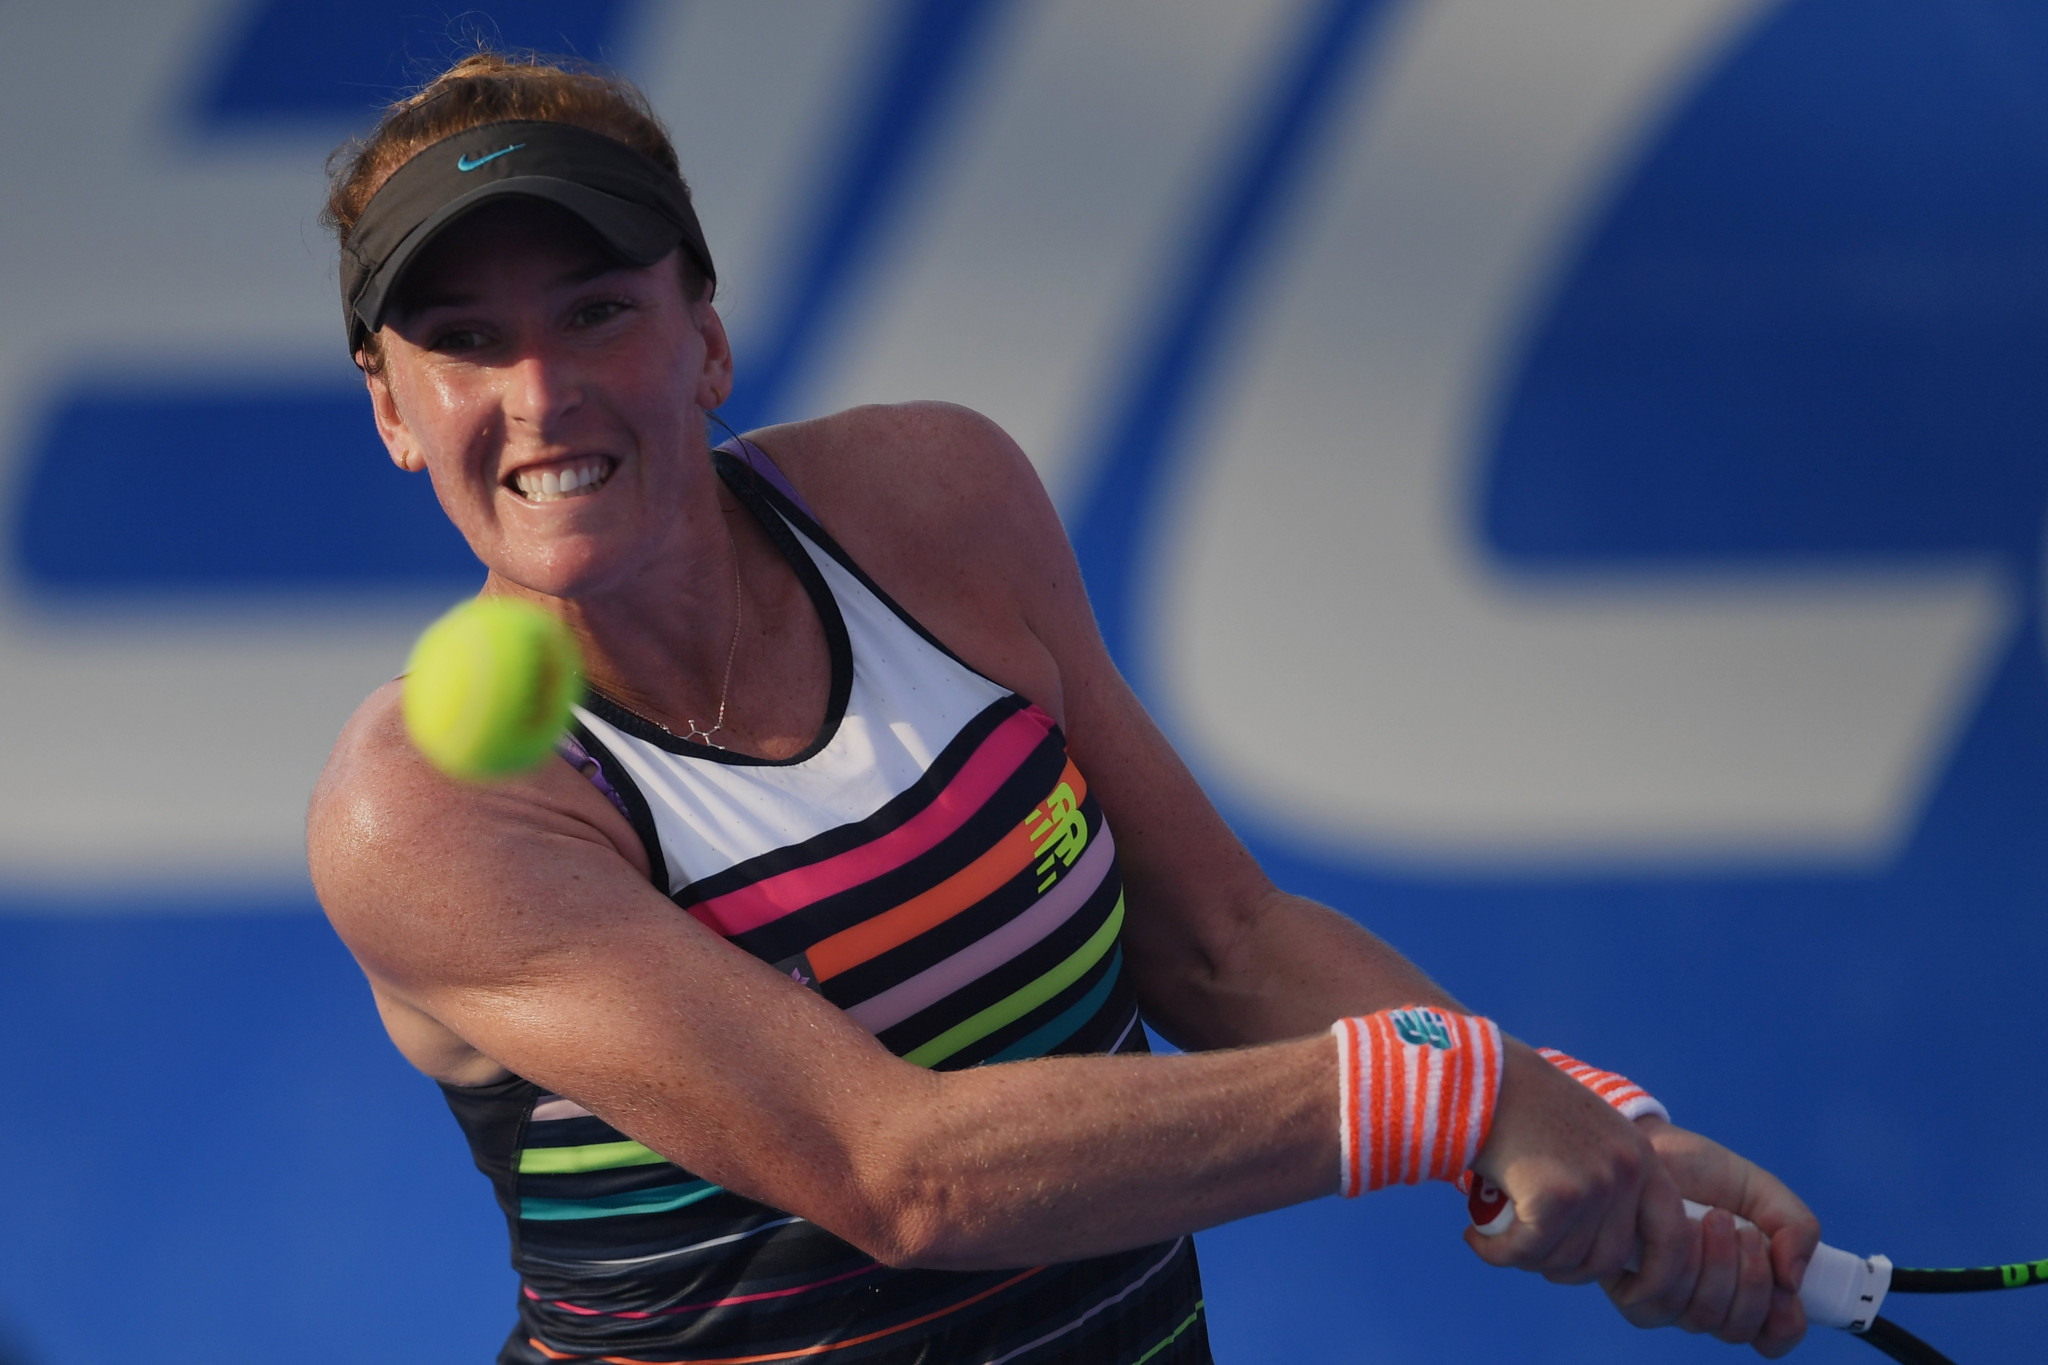 Brengle files lawsuit against tennis authorities for injuries suffered during drug tests